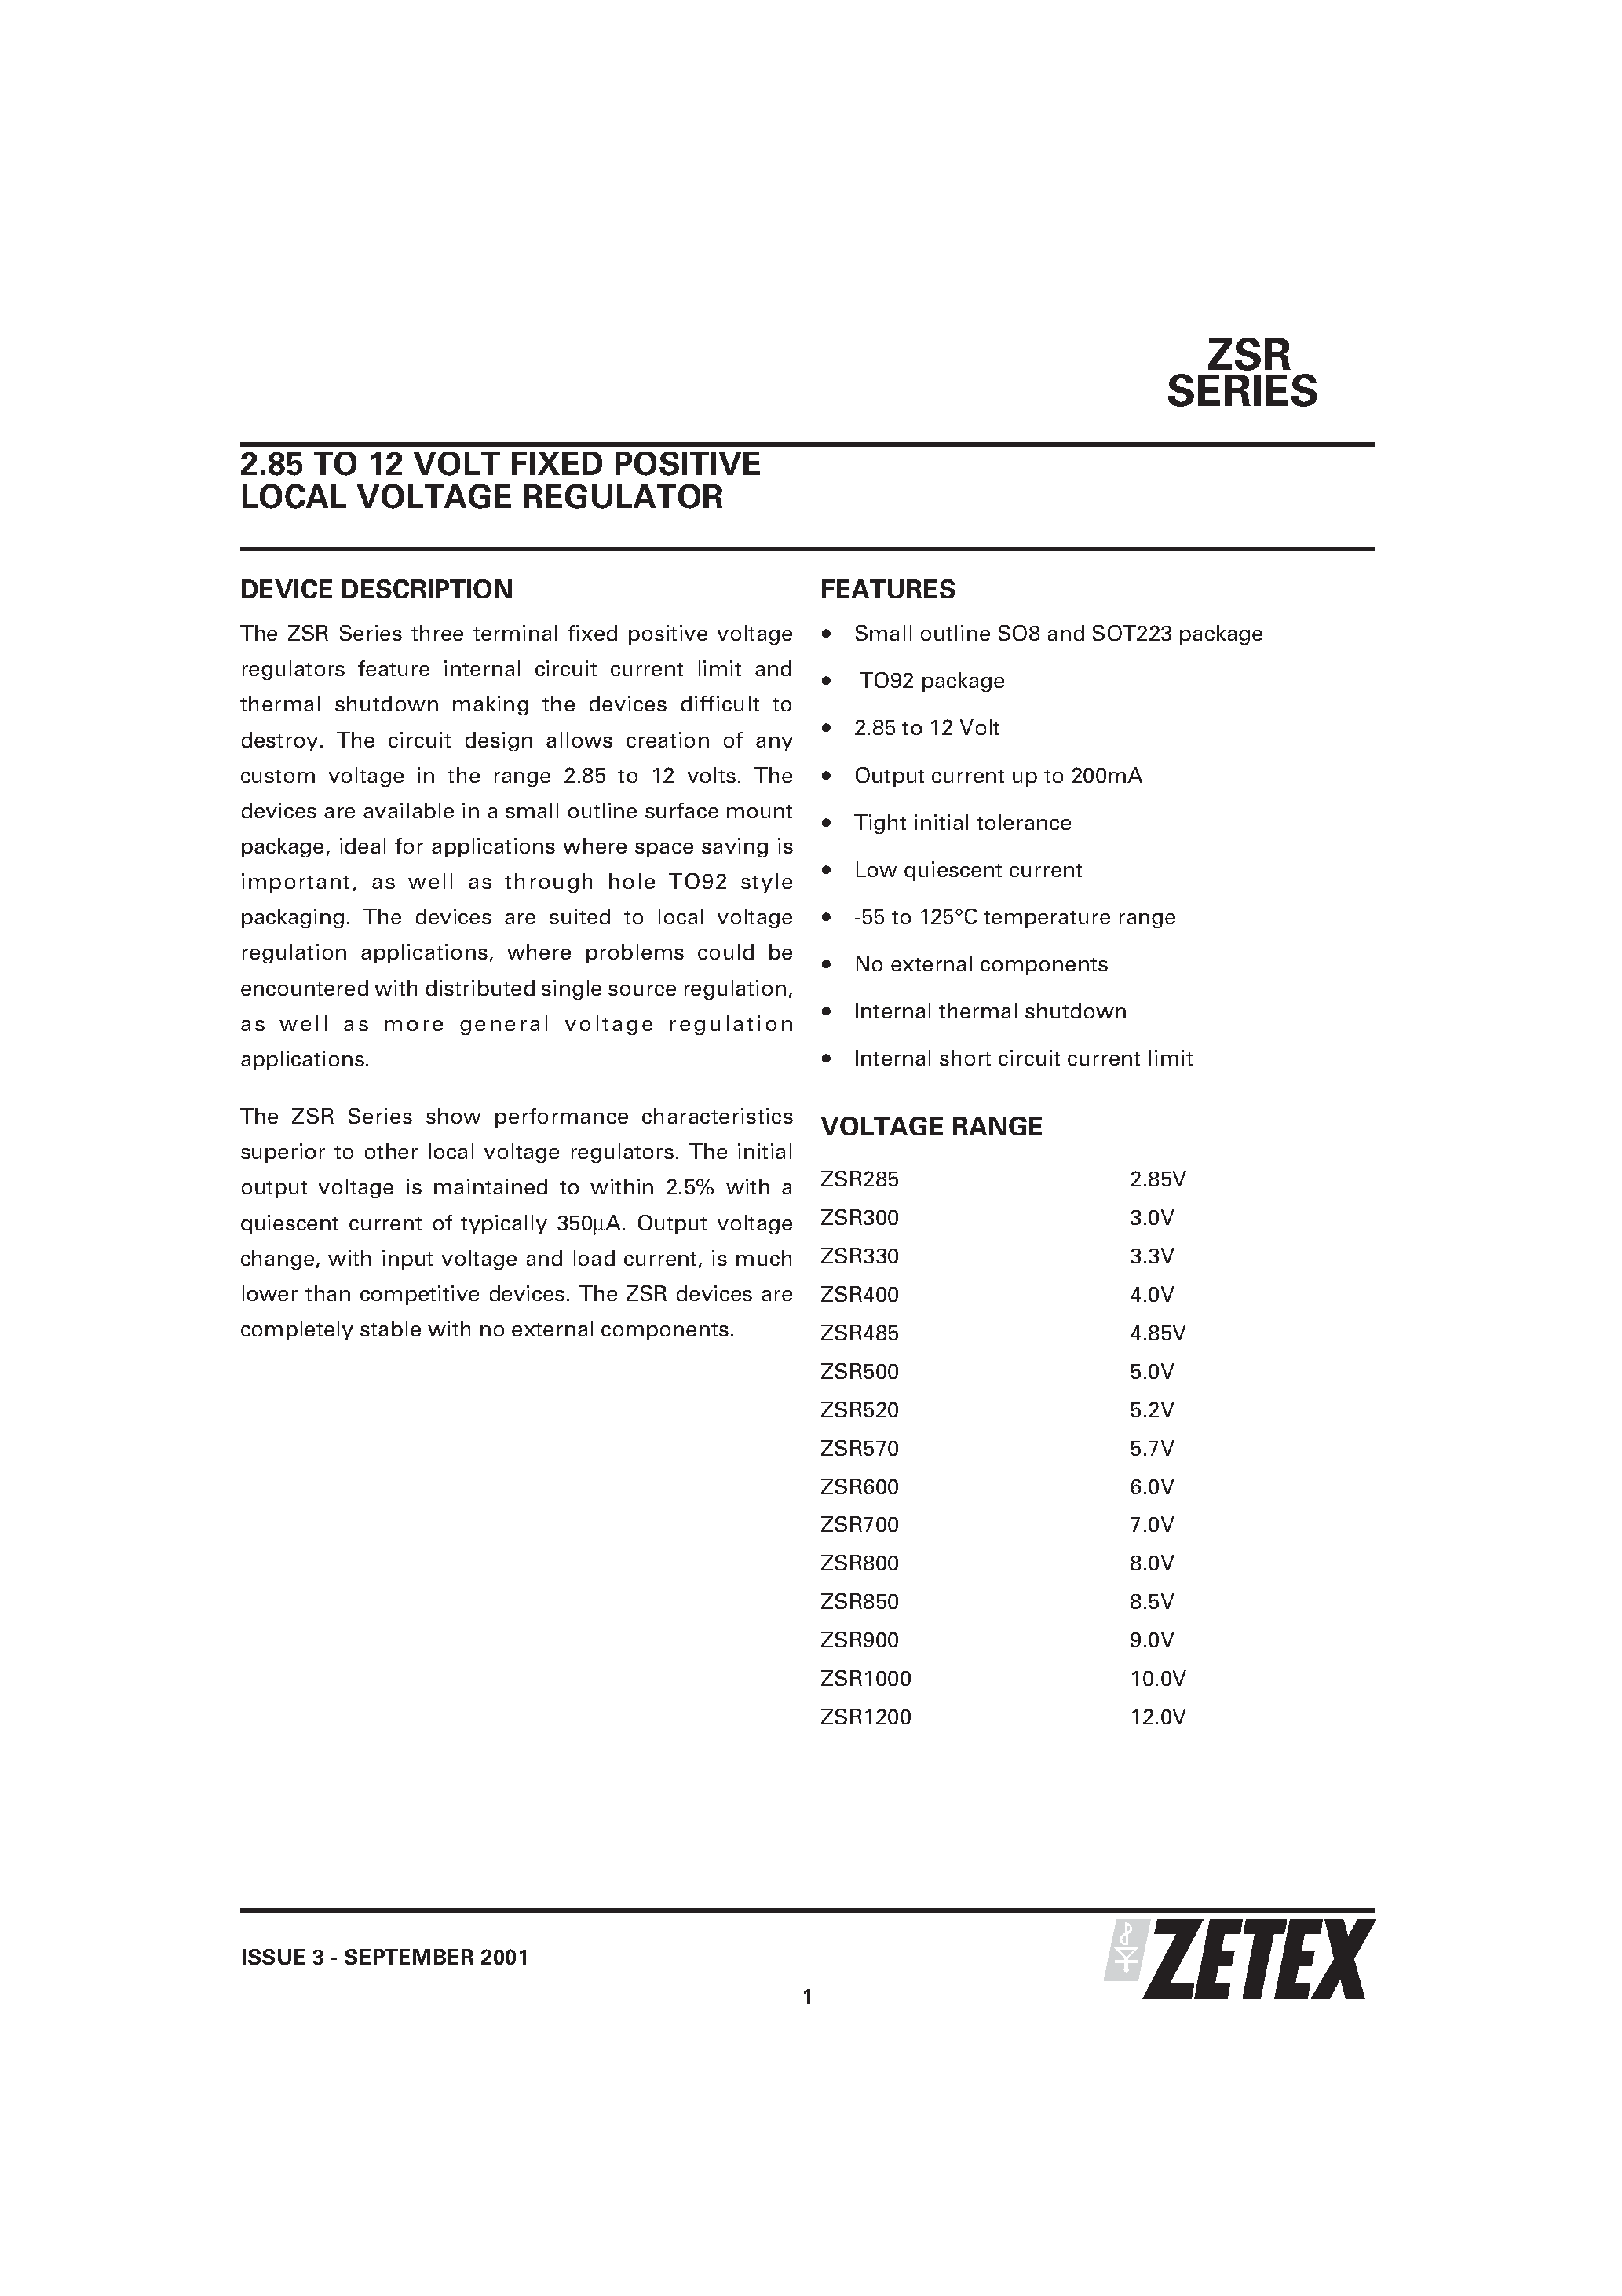 Datasheet ZSR300N8 - 2.85 TO 12 VOLT FIXED POSITIVE LOCAL VOLTAGE REGULATOR page 1